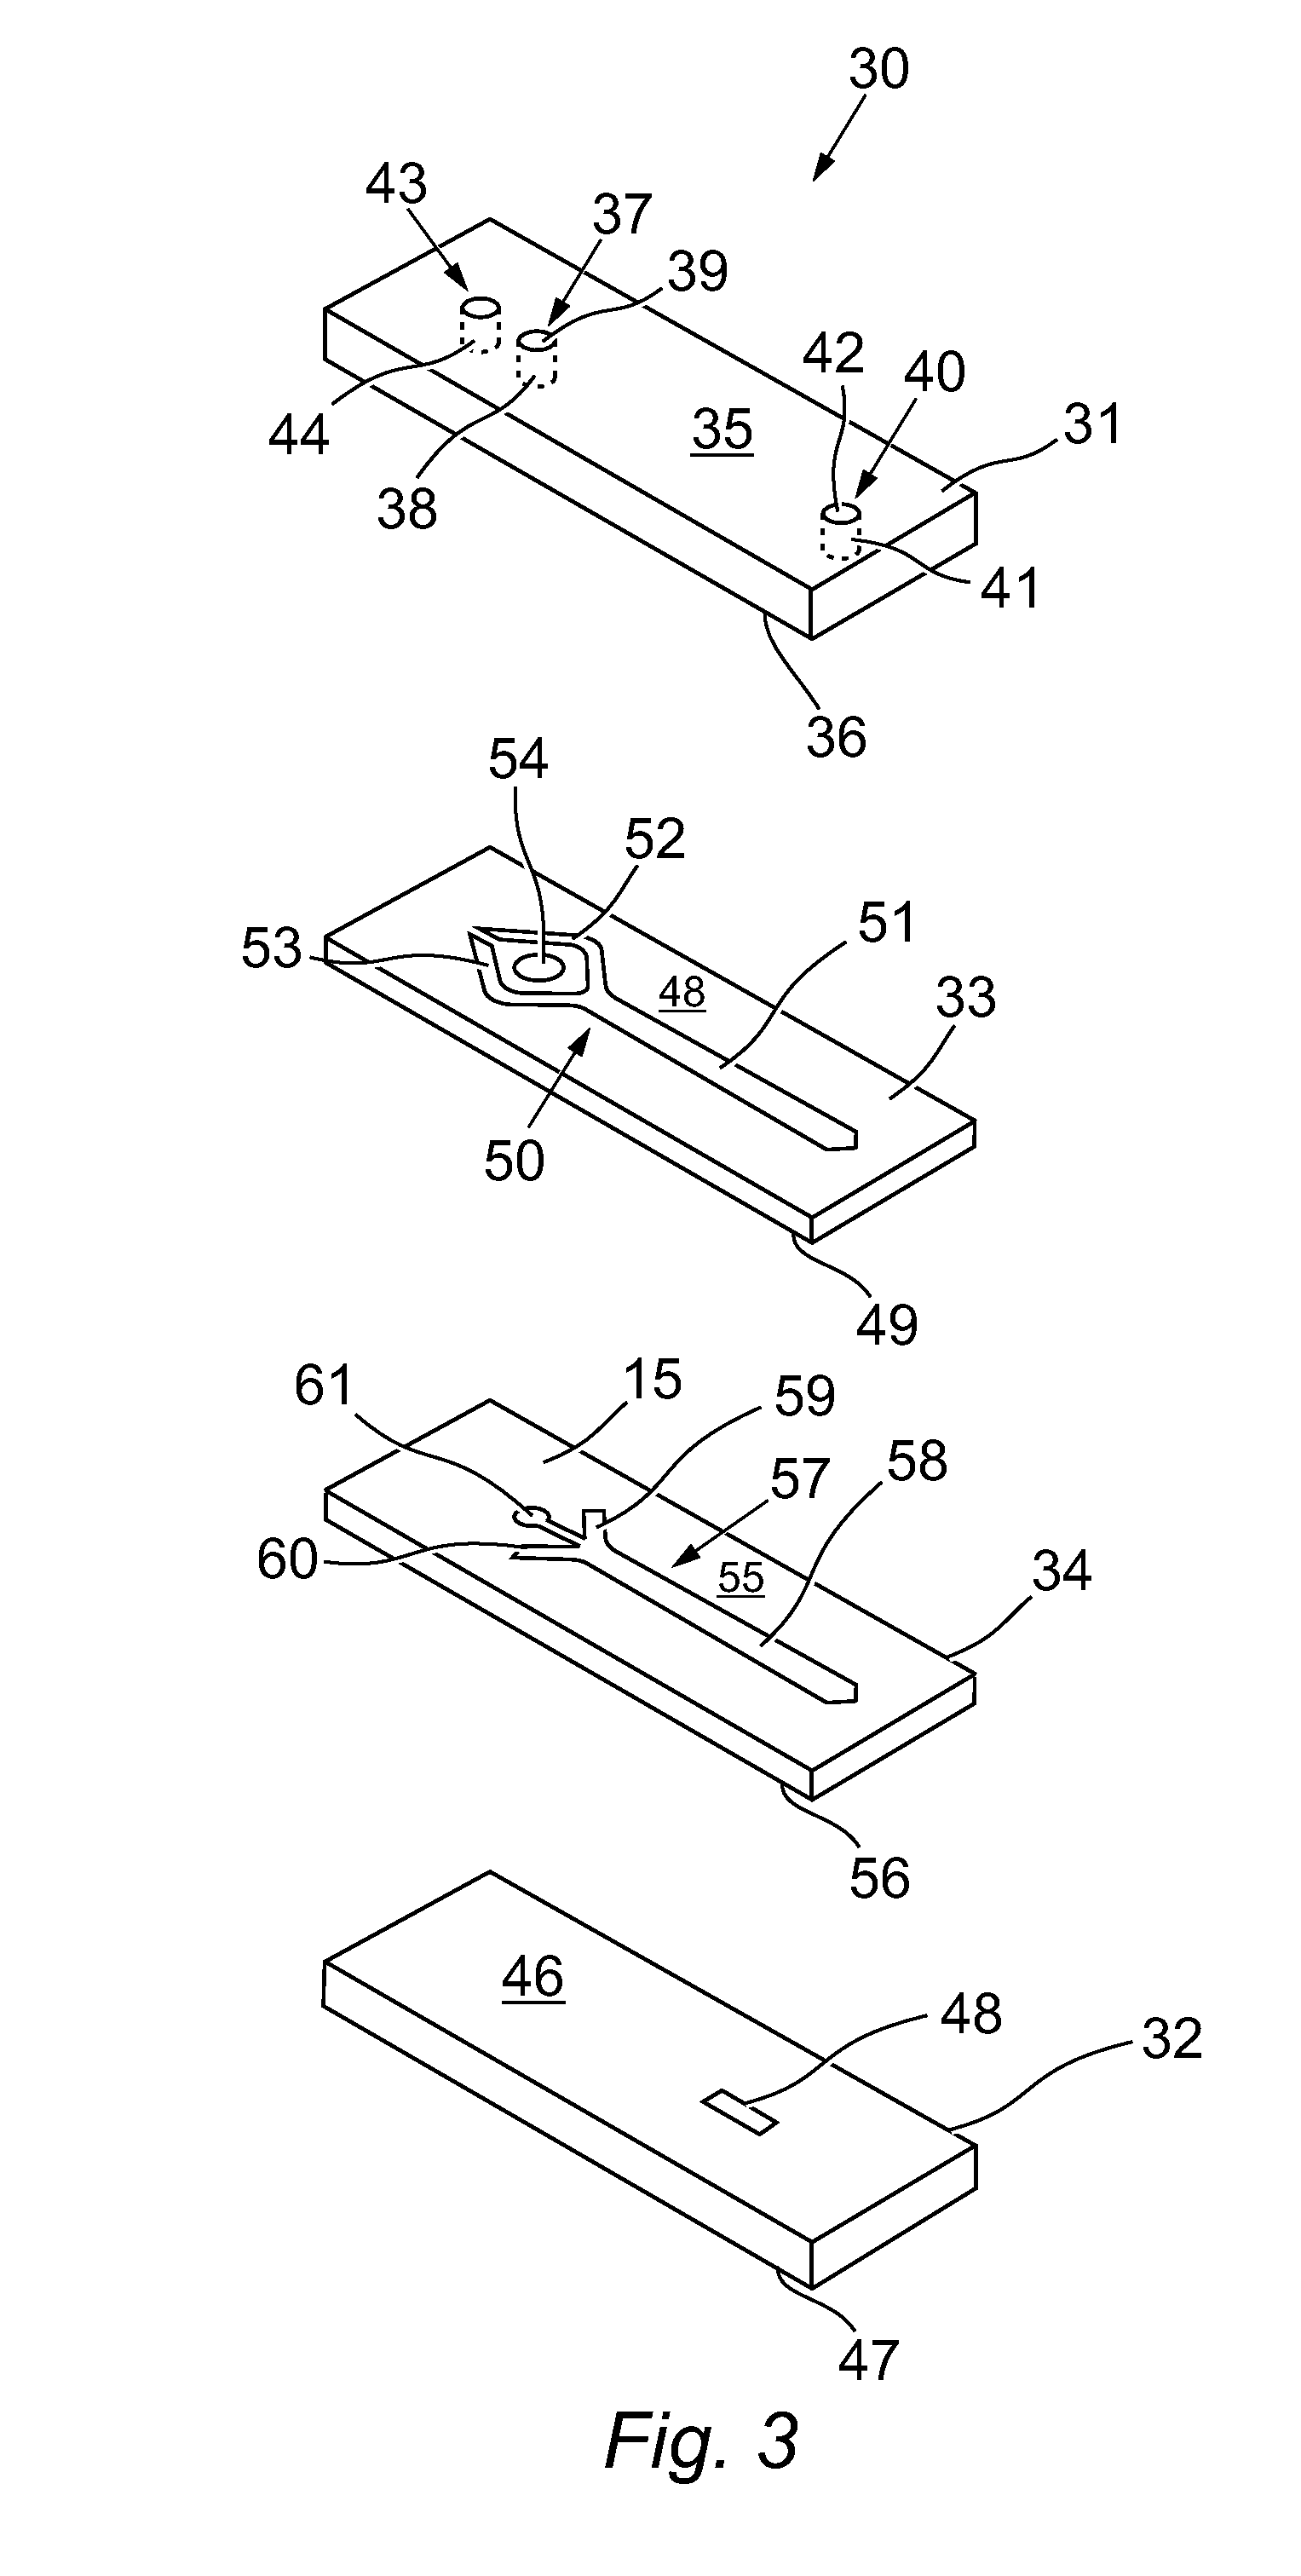 Microfluidic device for assessing object/test material interactions